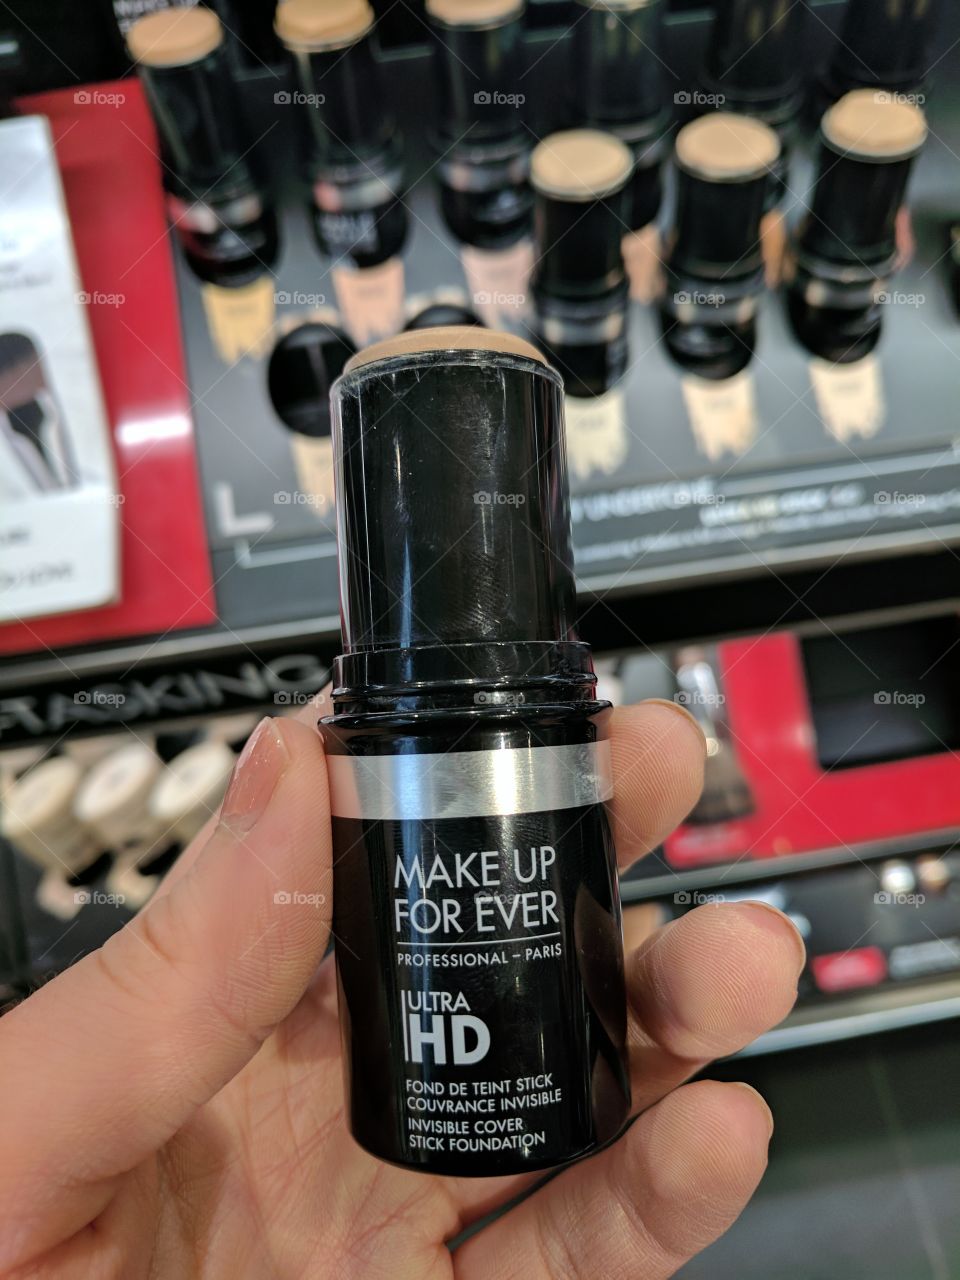 Makeup Forever Ultra HD Invisible Cover Stick Foundation at Sephora with Female hand